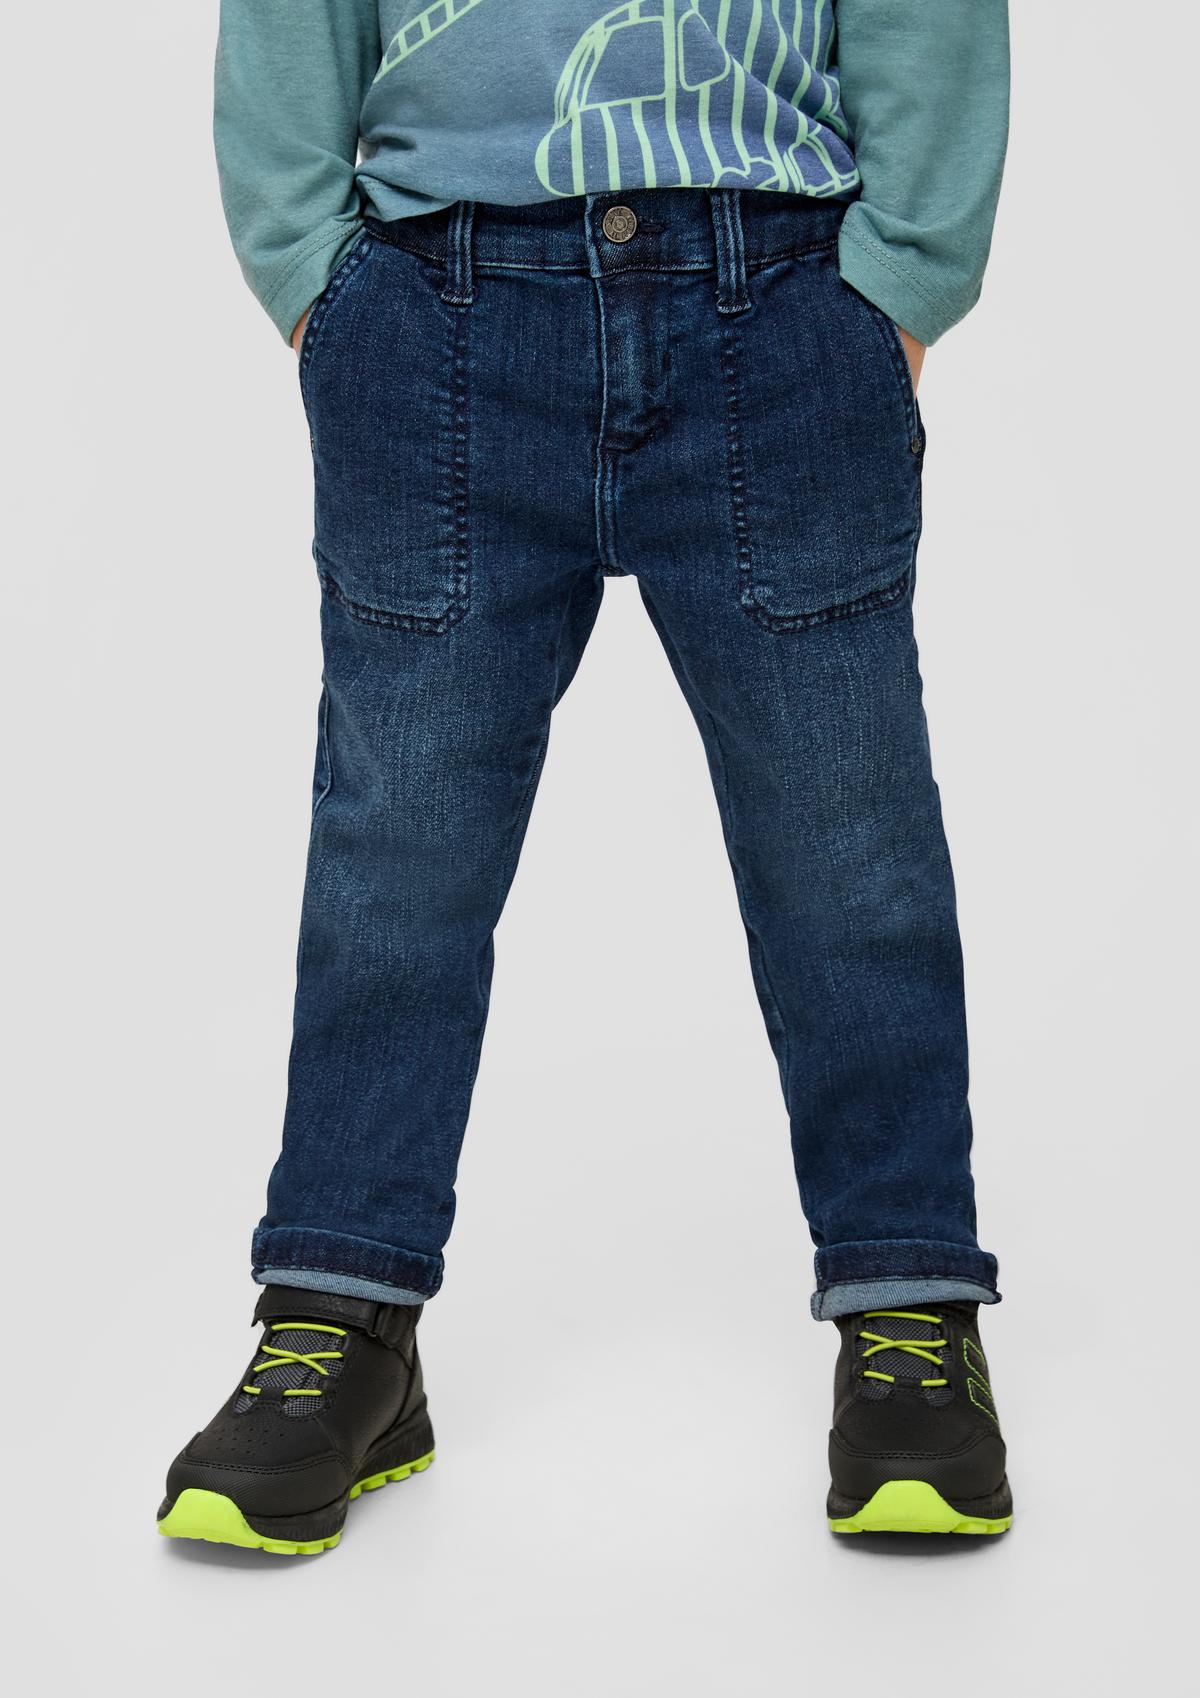 Pelle: jeans with an adjustable waistband